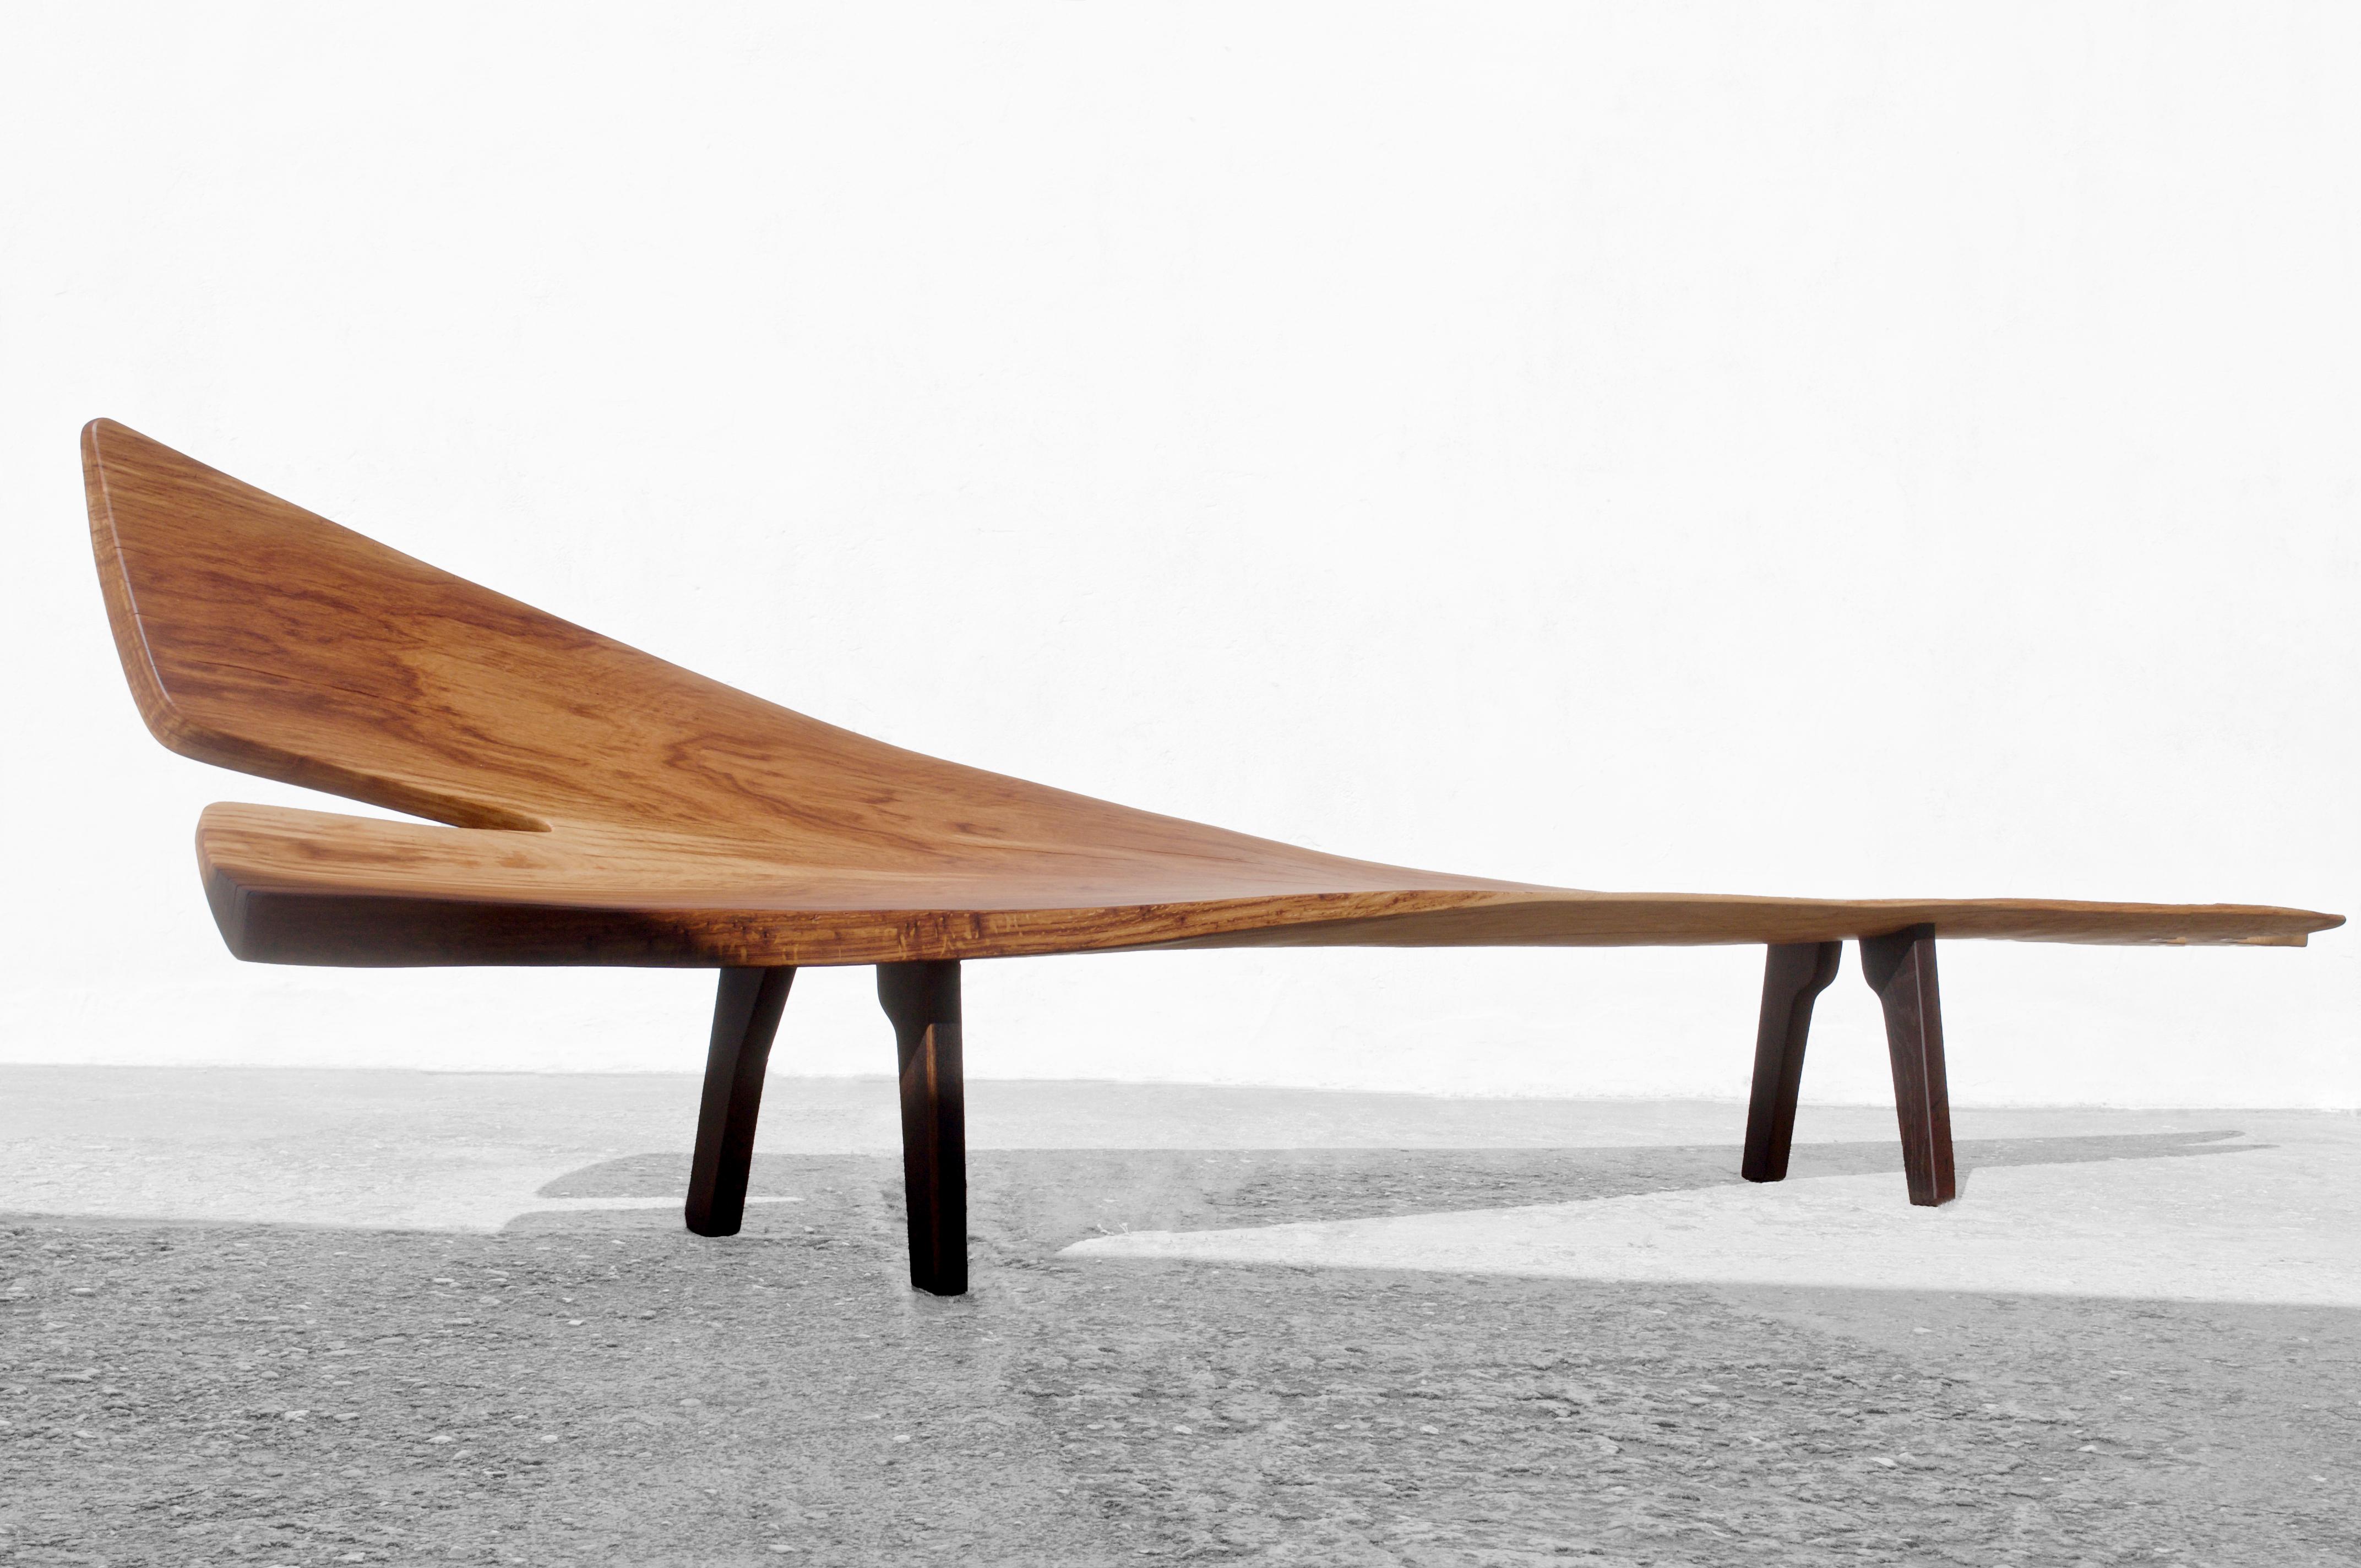 Unique Monumental bench sculpted by Jörg Pietschmann
Materials: Smoked Oak, polished oil finish.
Dimensions: W 400 x D 60 x H 104 cm
Seathight: 50 cm

In Pietschmann’s sculptures, trees that for centuries were part of a landscape and founded in